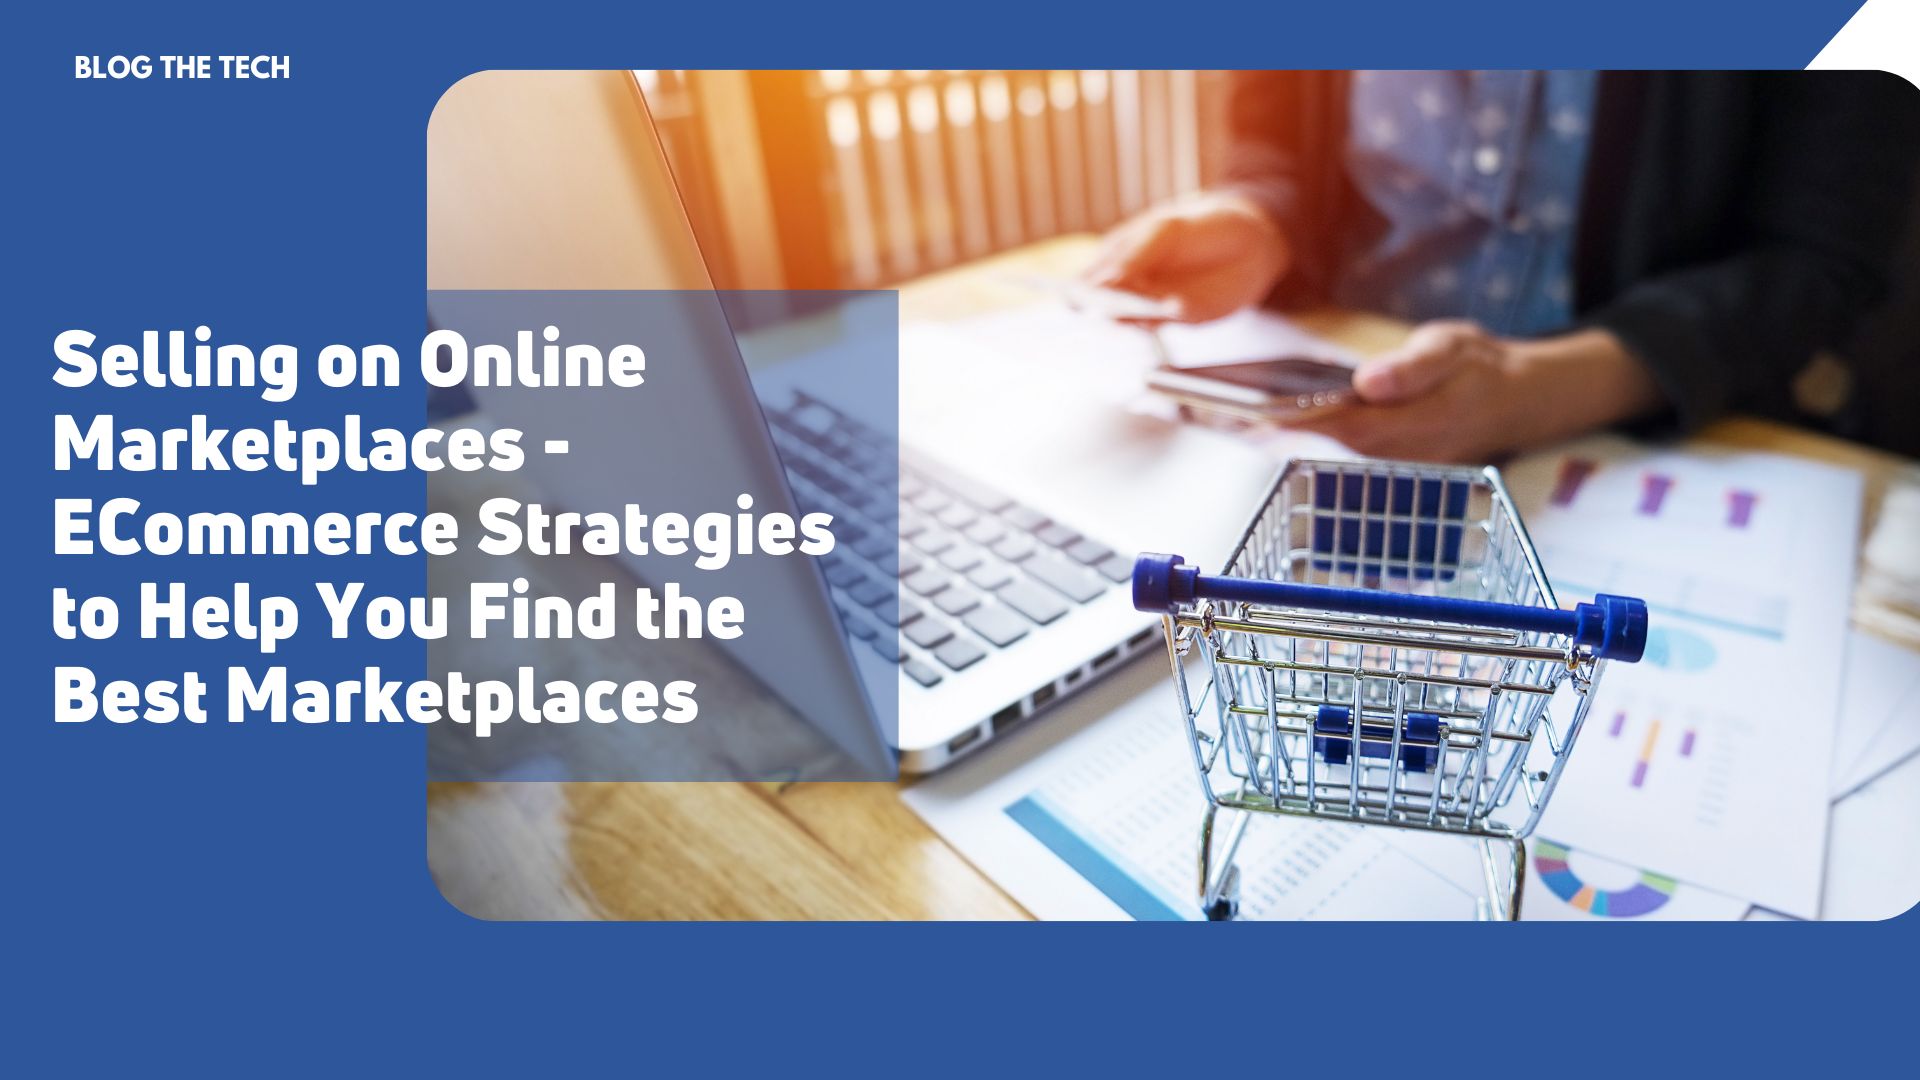 Selling on Online Marketplaces - ECommerce Strategies to Help You Find the Best Marketplaces